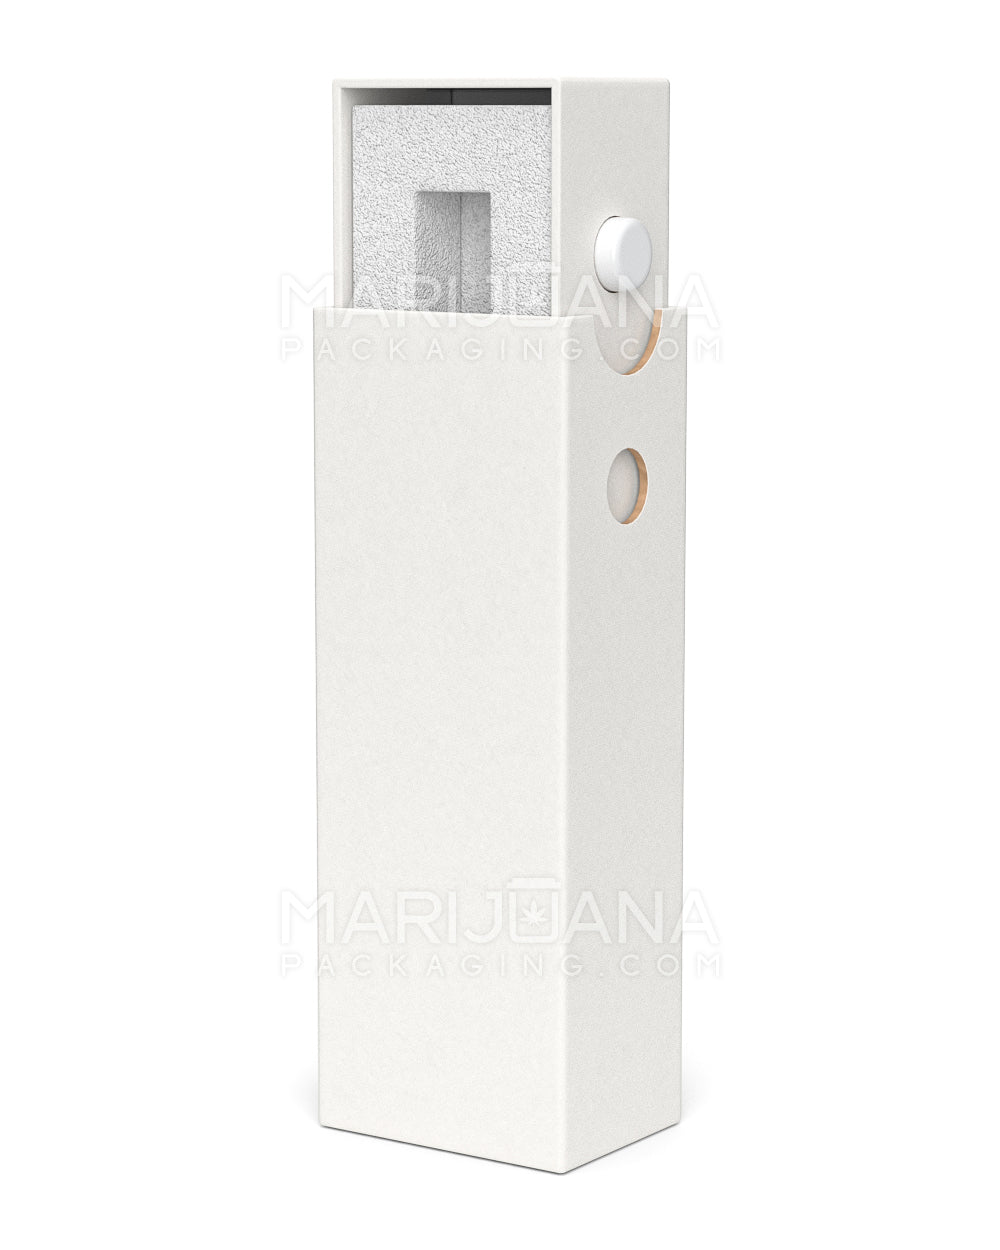 Child Resistant & Sustainable | 100% Recyclable Cardboard Vape Cartridge Box w/ Button & Foam Insert | 100mm - White  - 1